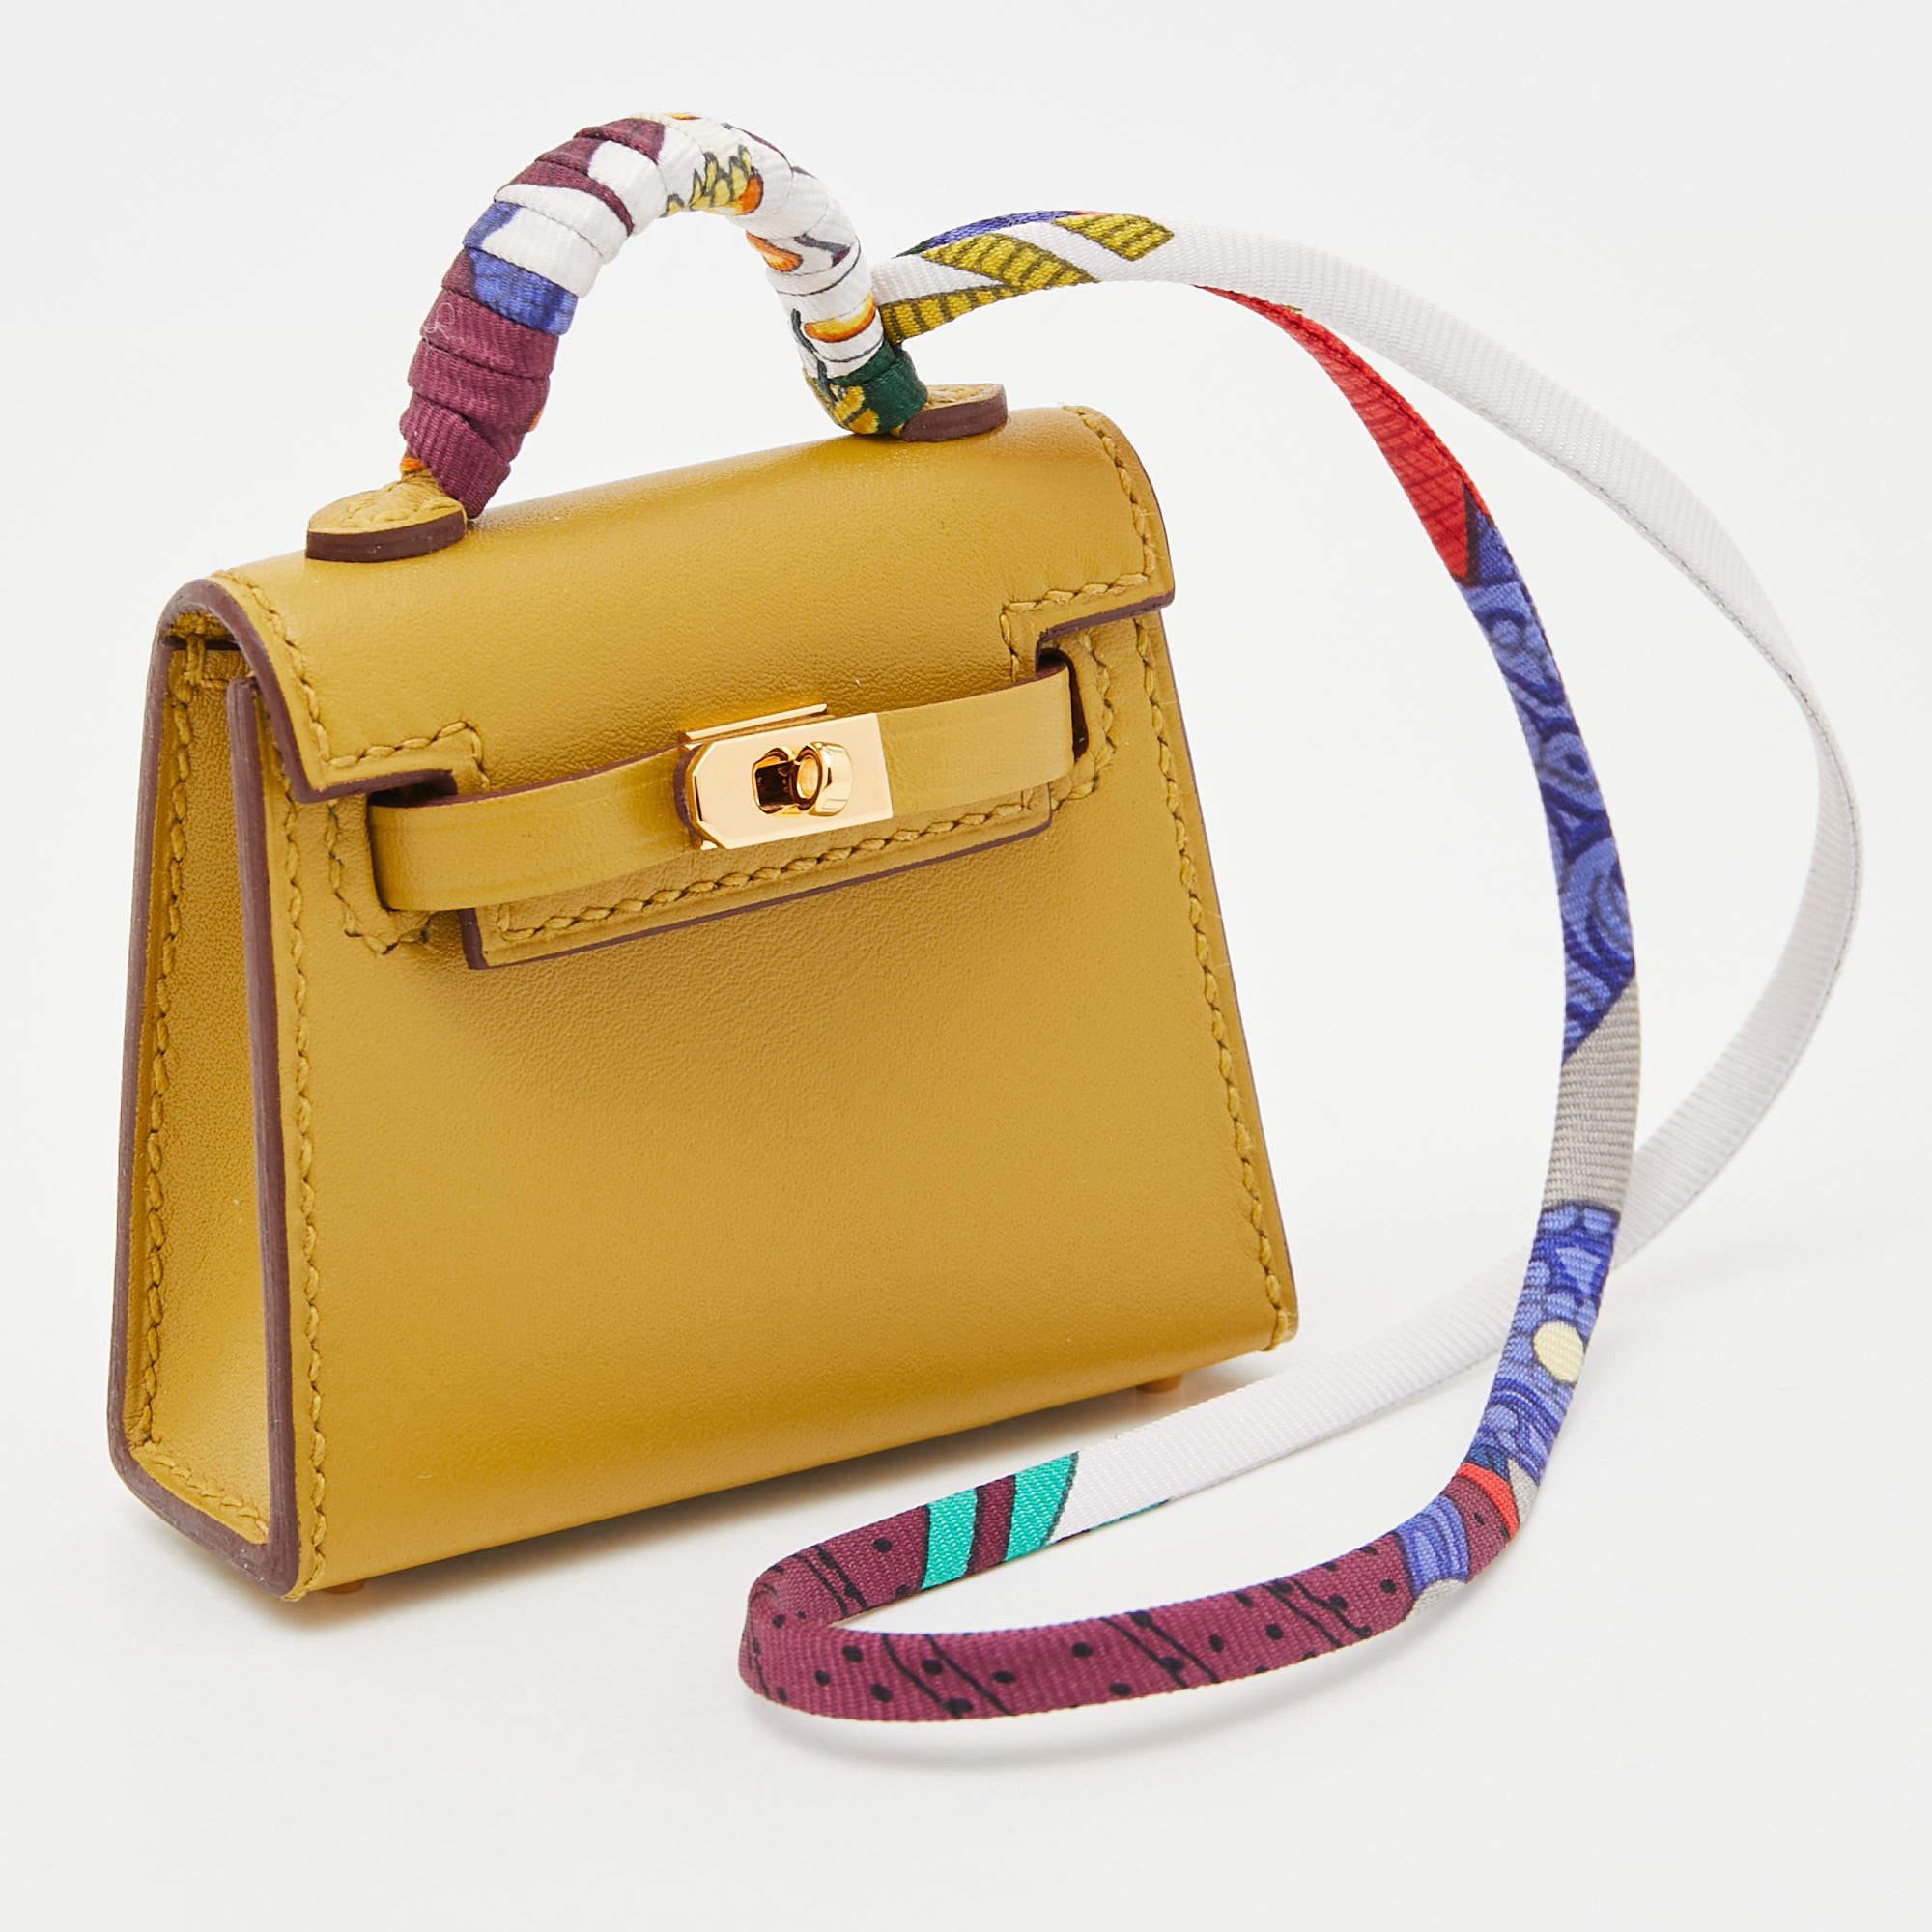 Wondering how to decorate your Kelly bag? Use this mini Kelly twilly bag charm! It is crafted using leather into the structure we love so much. It has the signature handles, and the front lock can be unclasped too.

Includes
Original Dustbag,